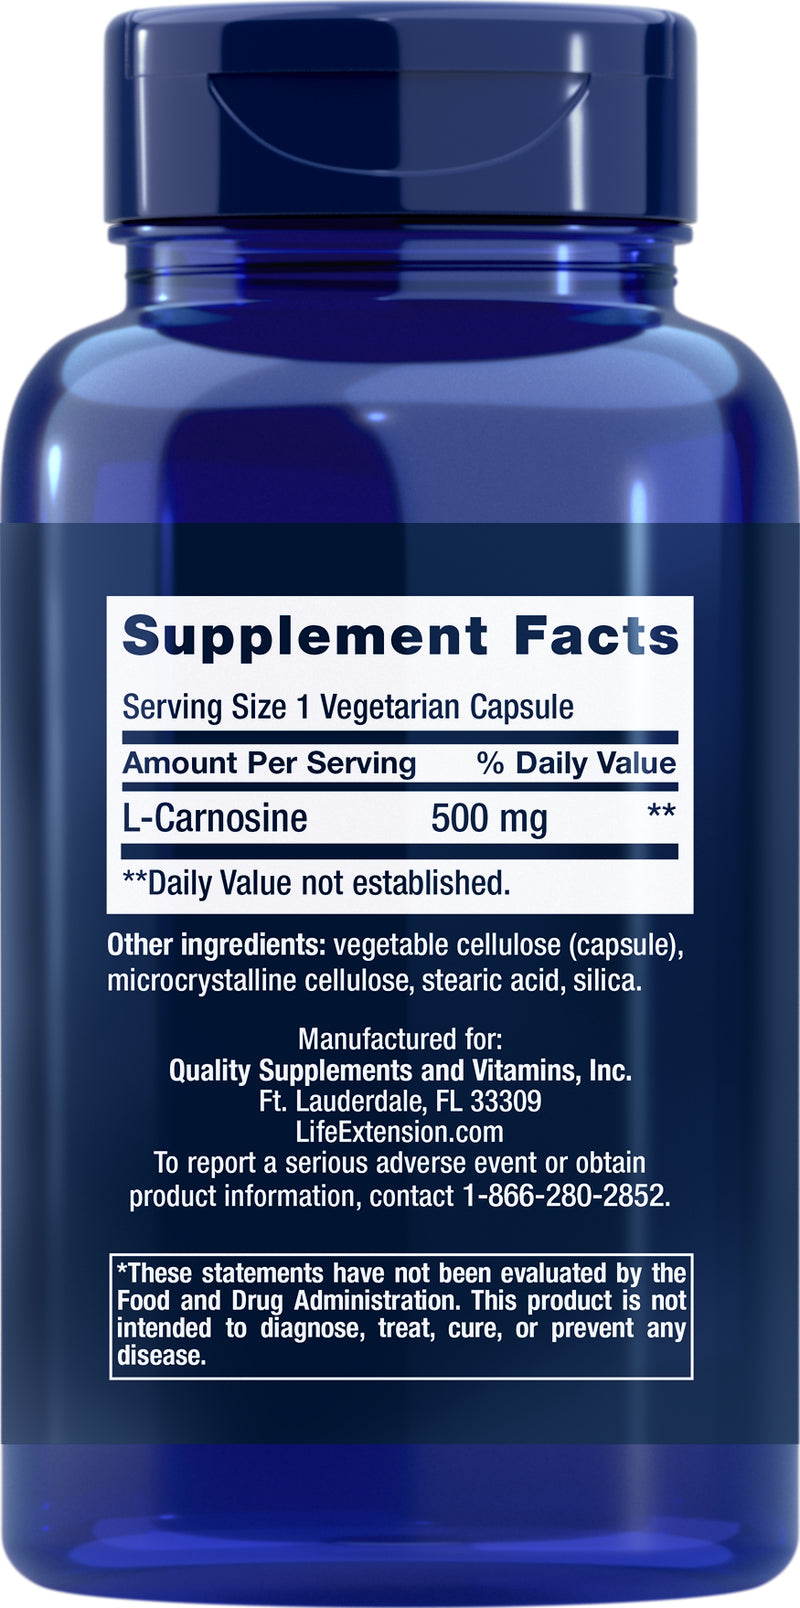 Carnosine 500 mg, 60  vegetarian capsules by Life Extension